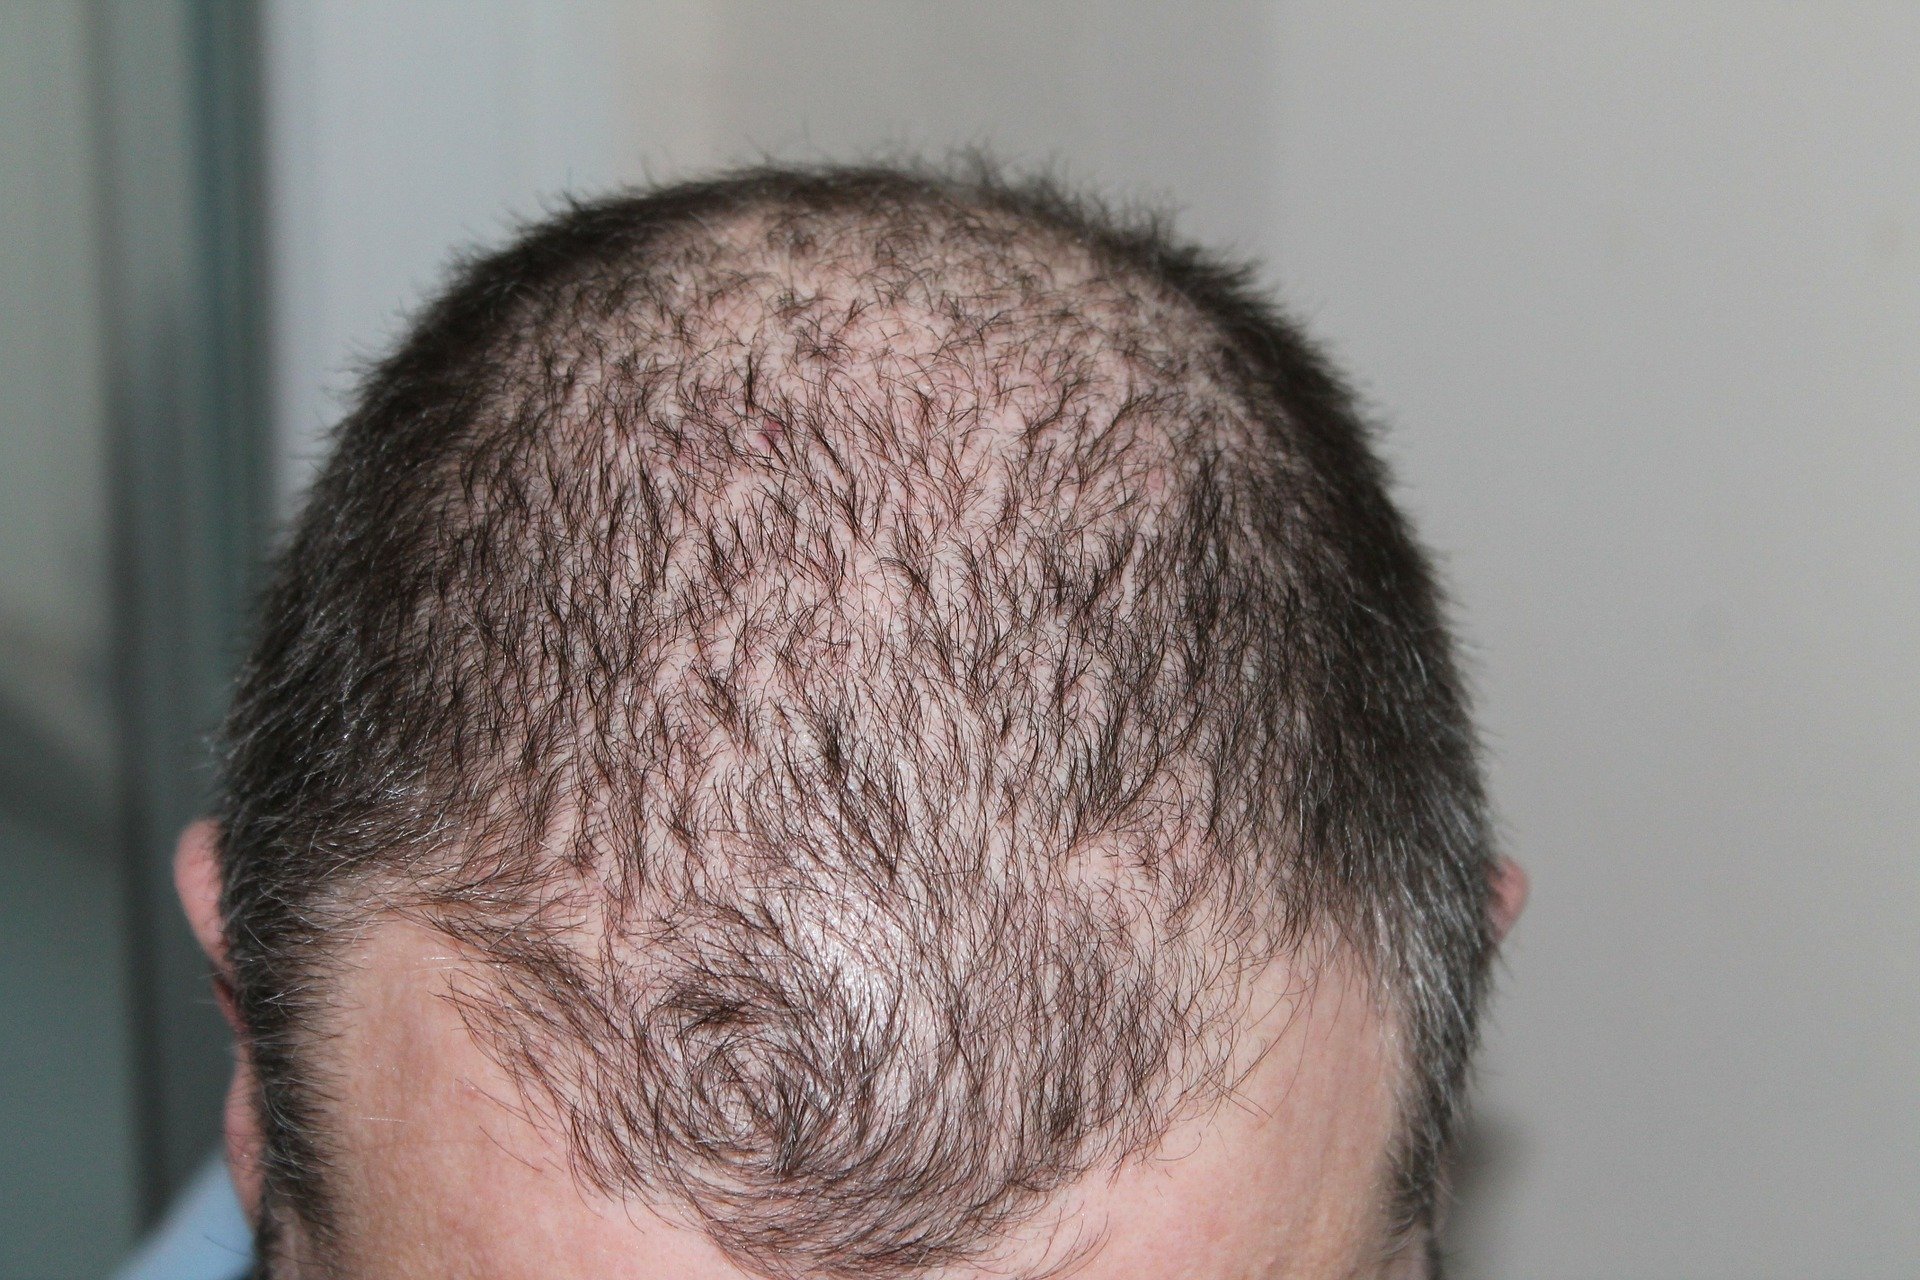 Replicel says hair loss therapy is safe, with glimmers of efficacy | Fierce  Biotech